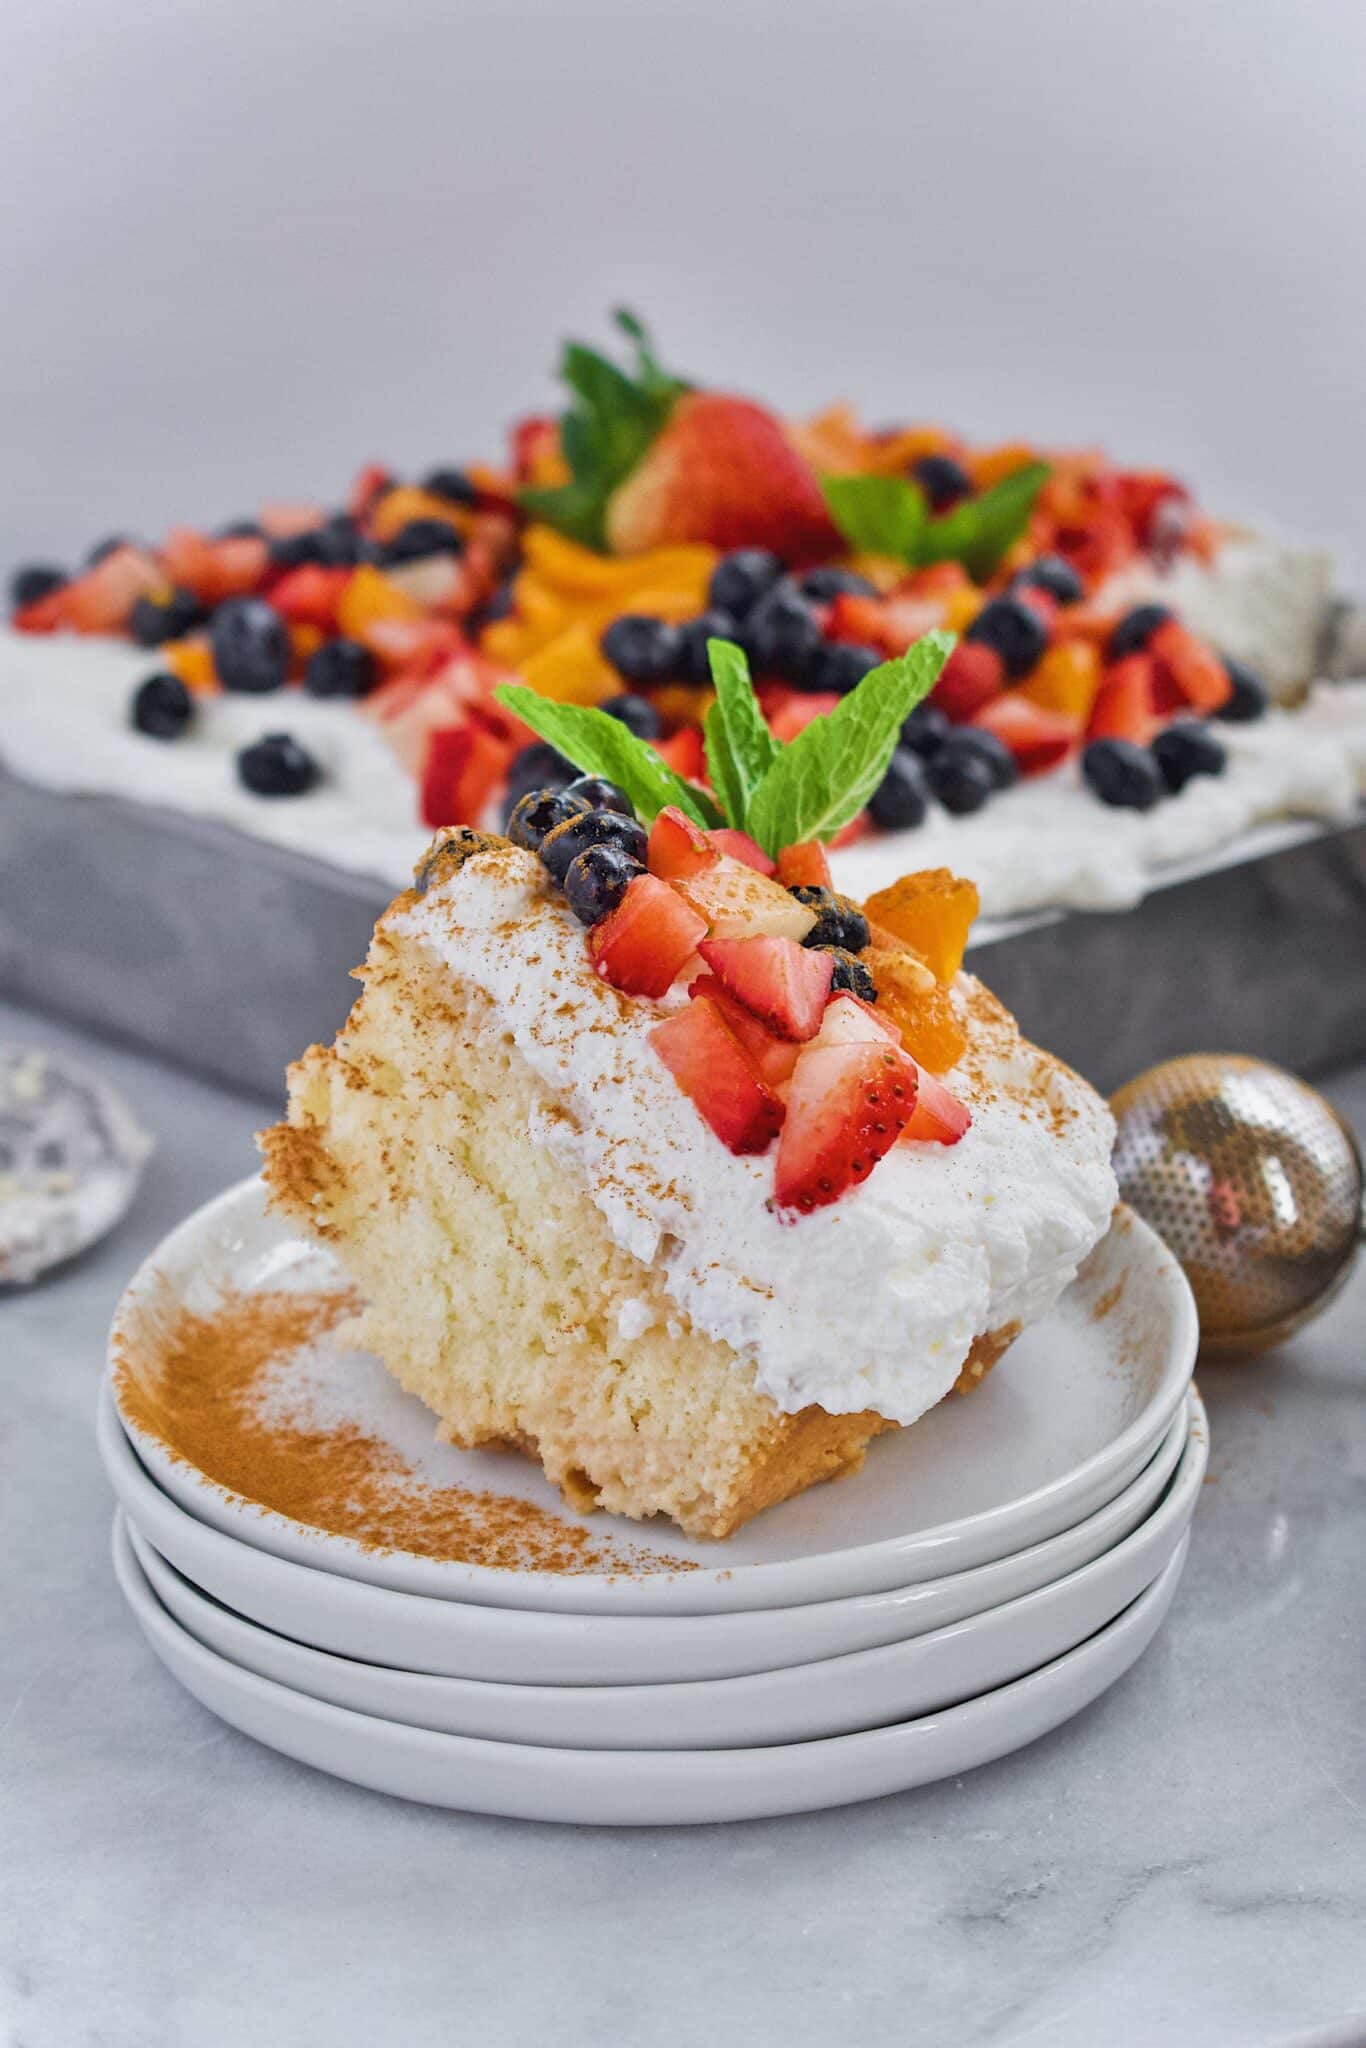 Joanna Gaines Tres Leches Cake